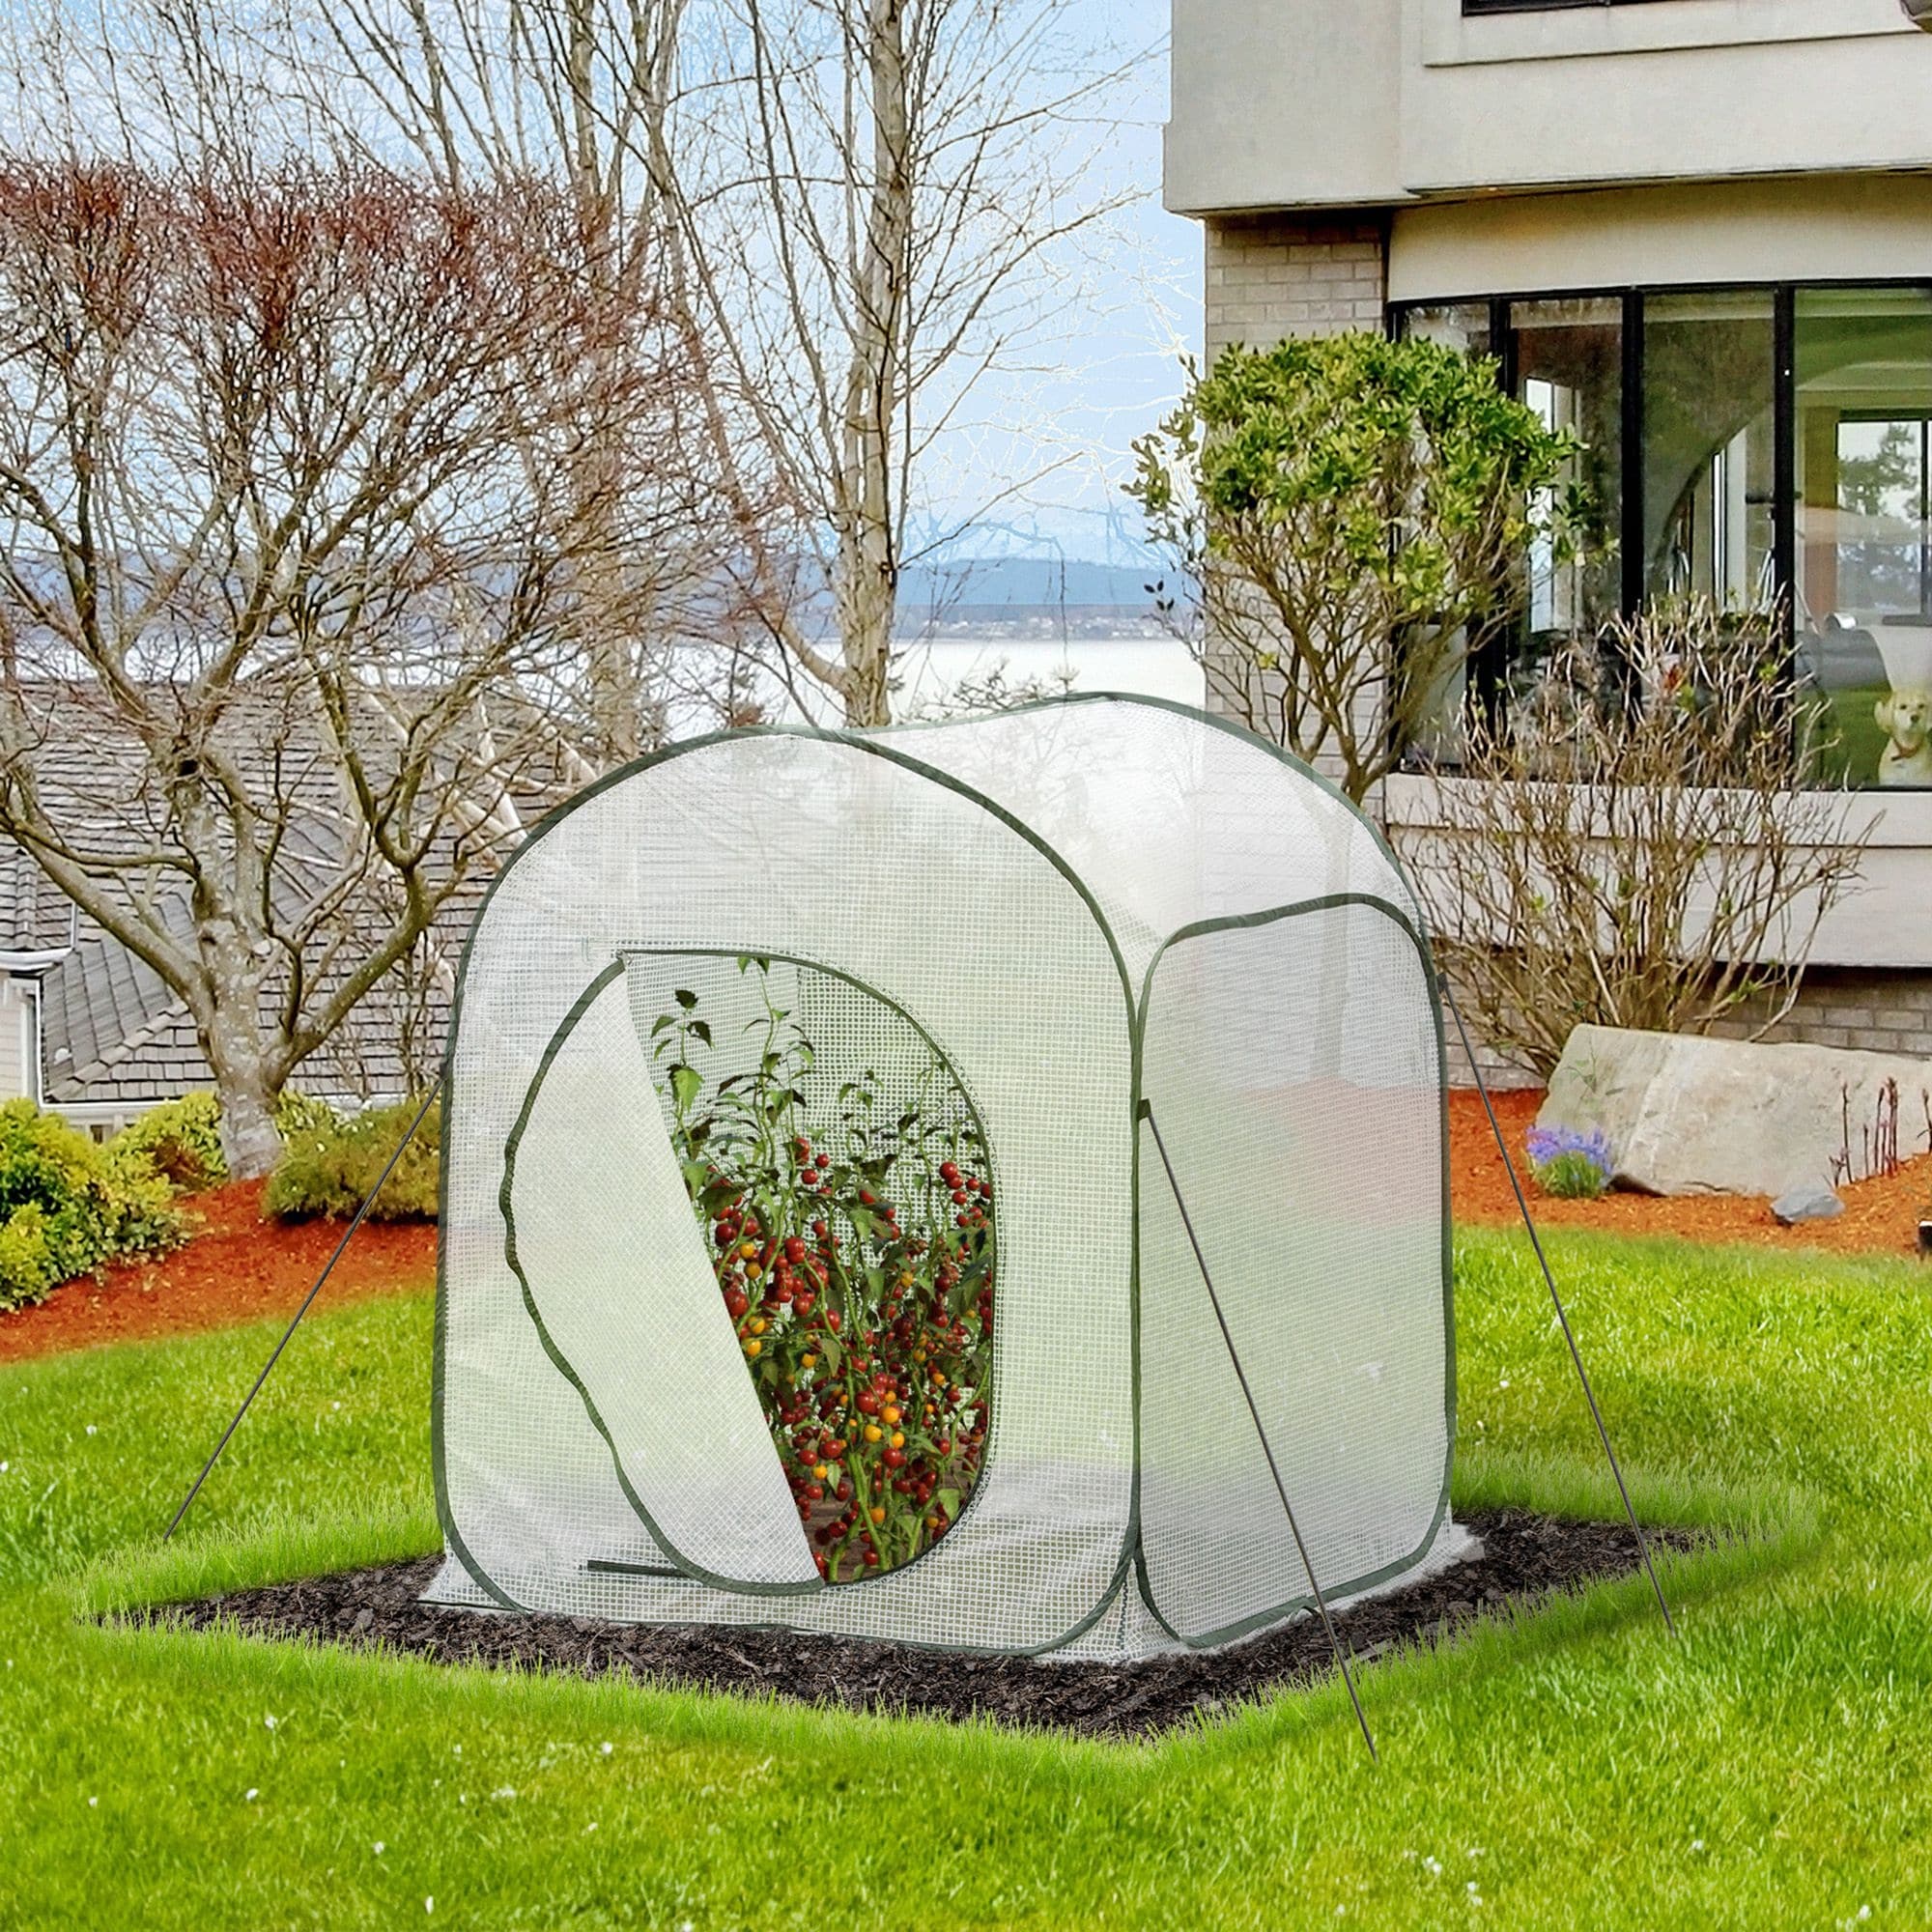 Green House Mini Portable Outdoor Warm Greenhouse Flower Plants Gardening Covers 